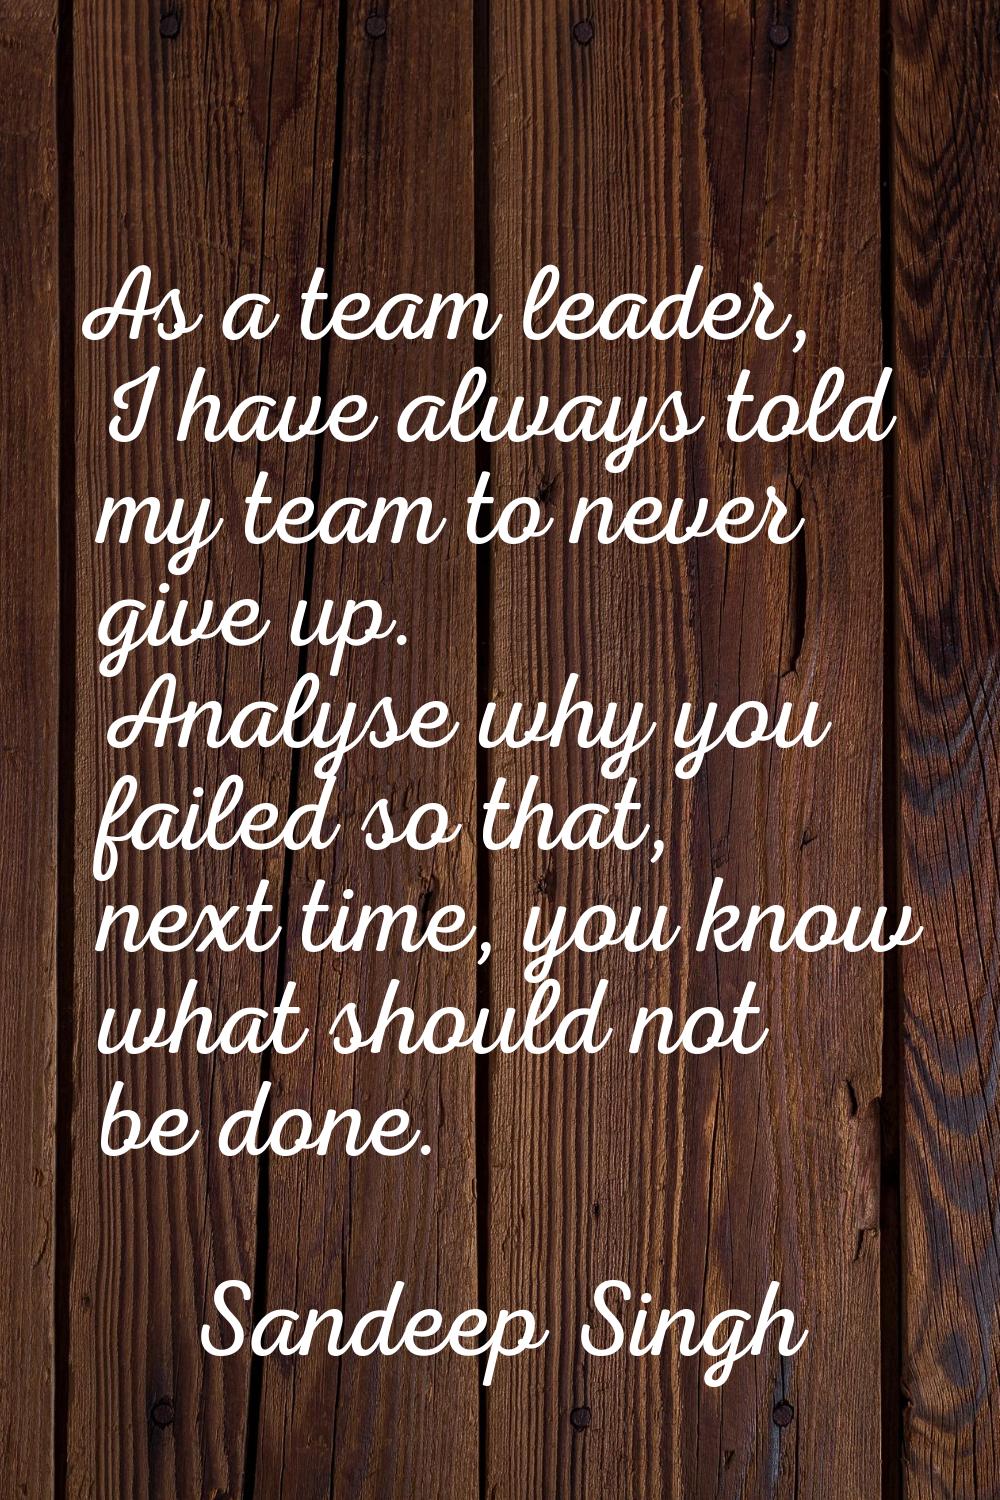 As a team leader, I have always told my team to never give up. Analyse why you failed so that, next